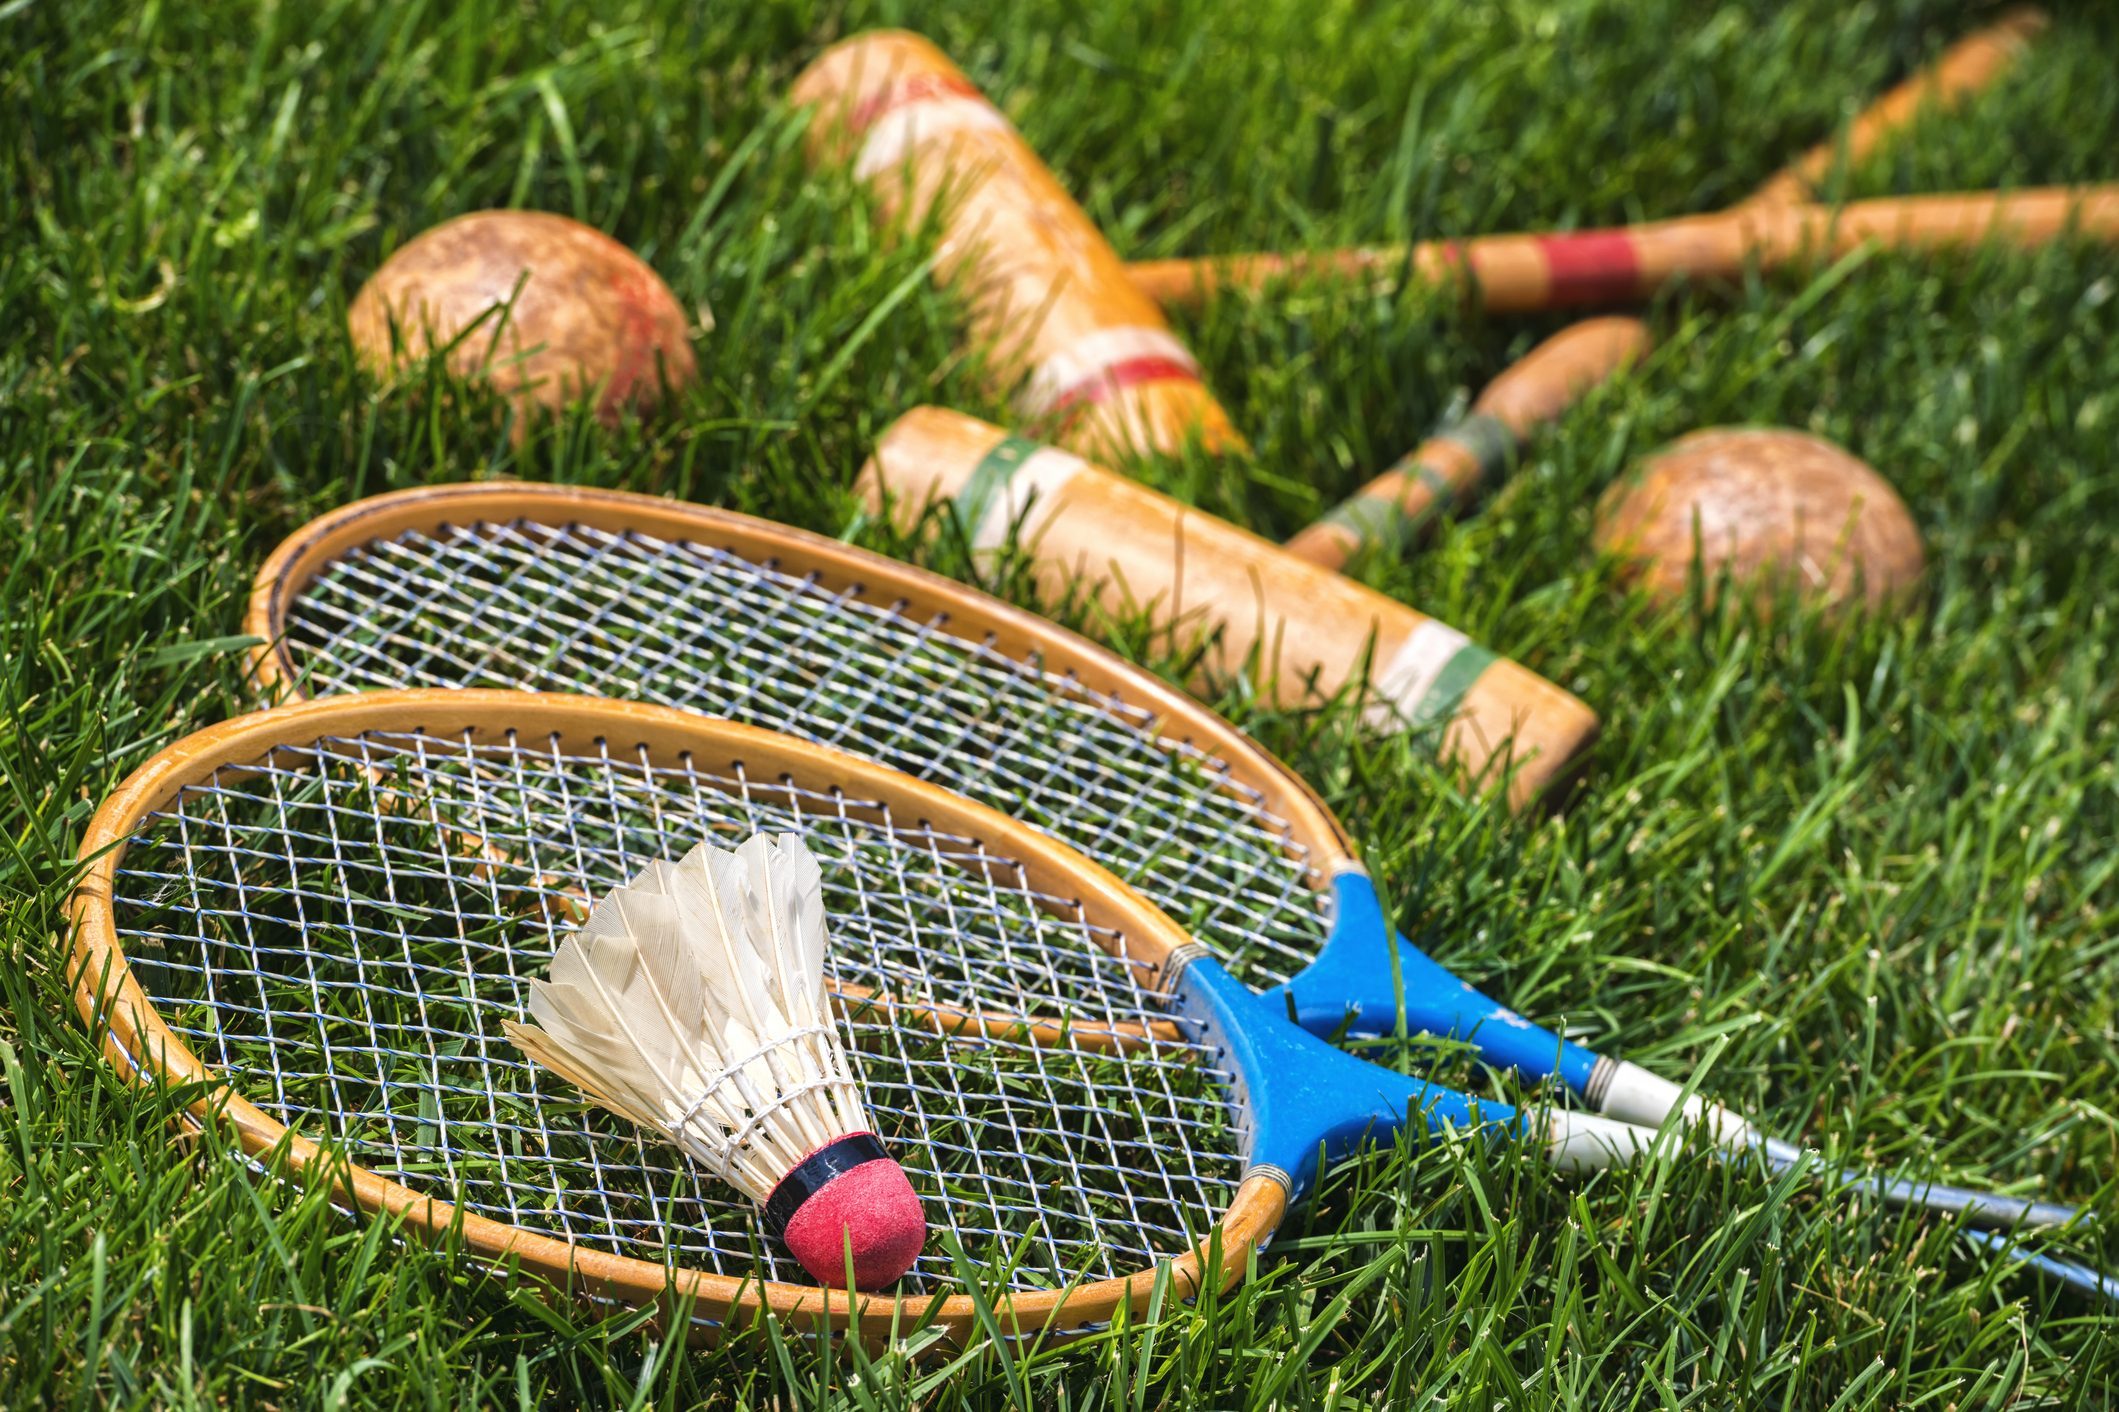 Vintage badminton rackets and croquet mallets lying in grass